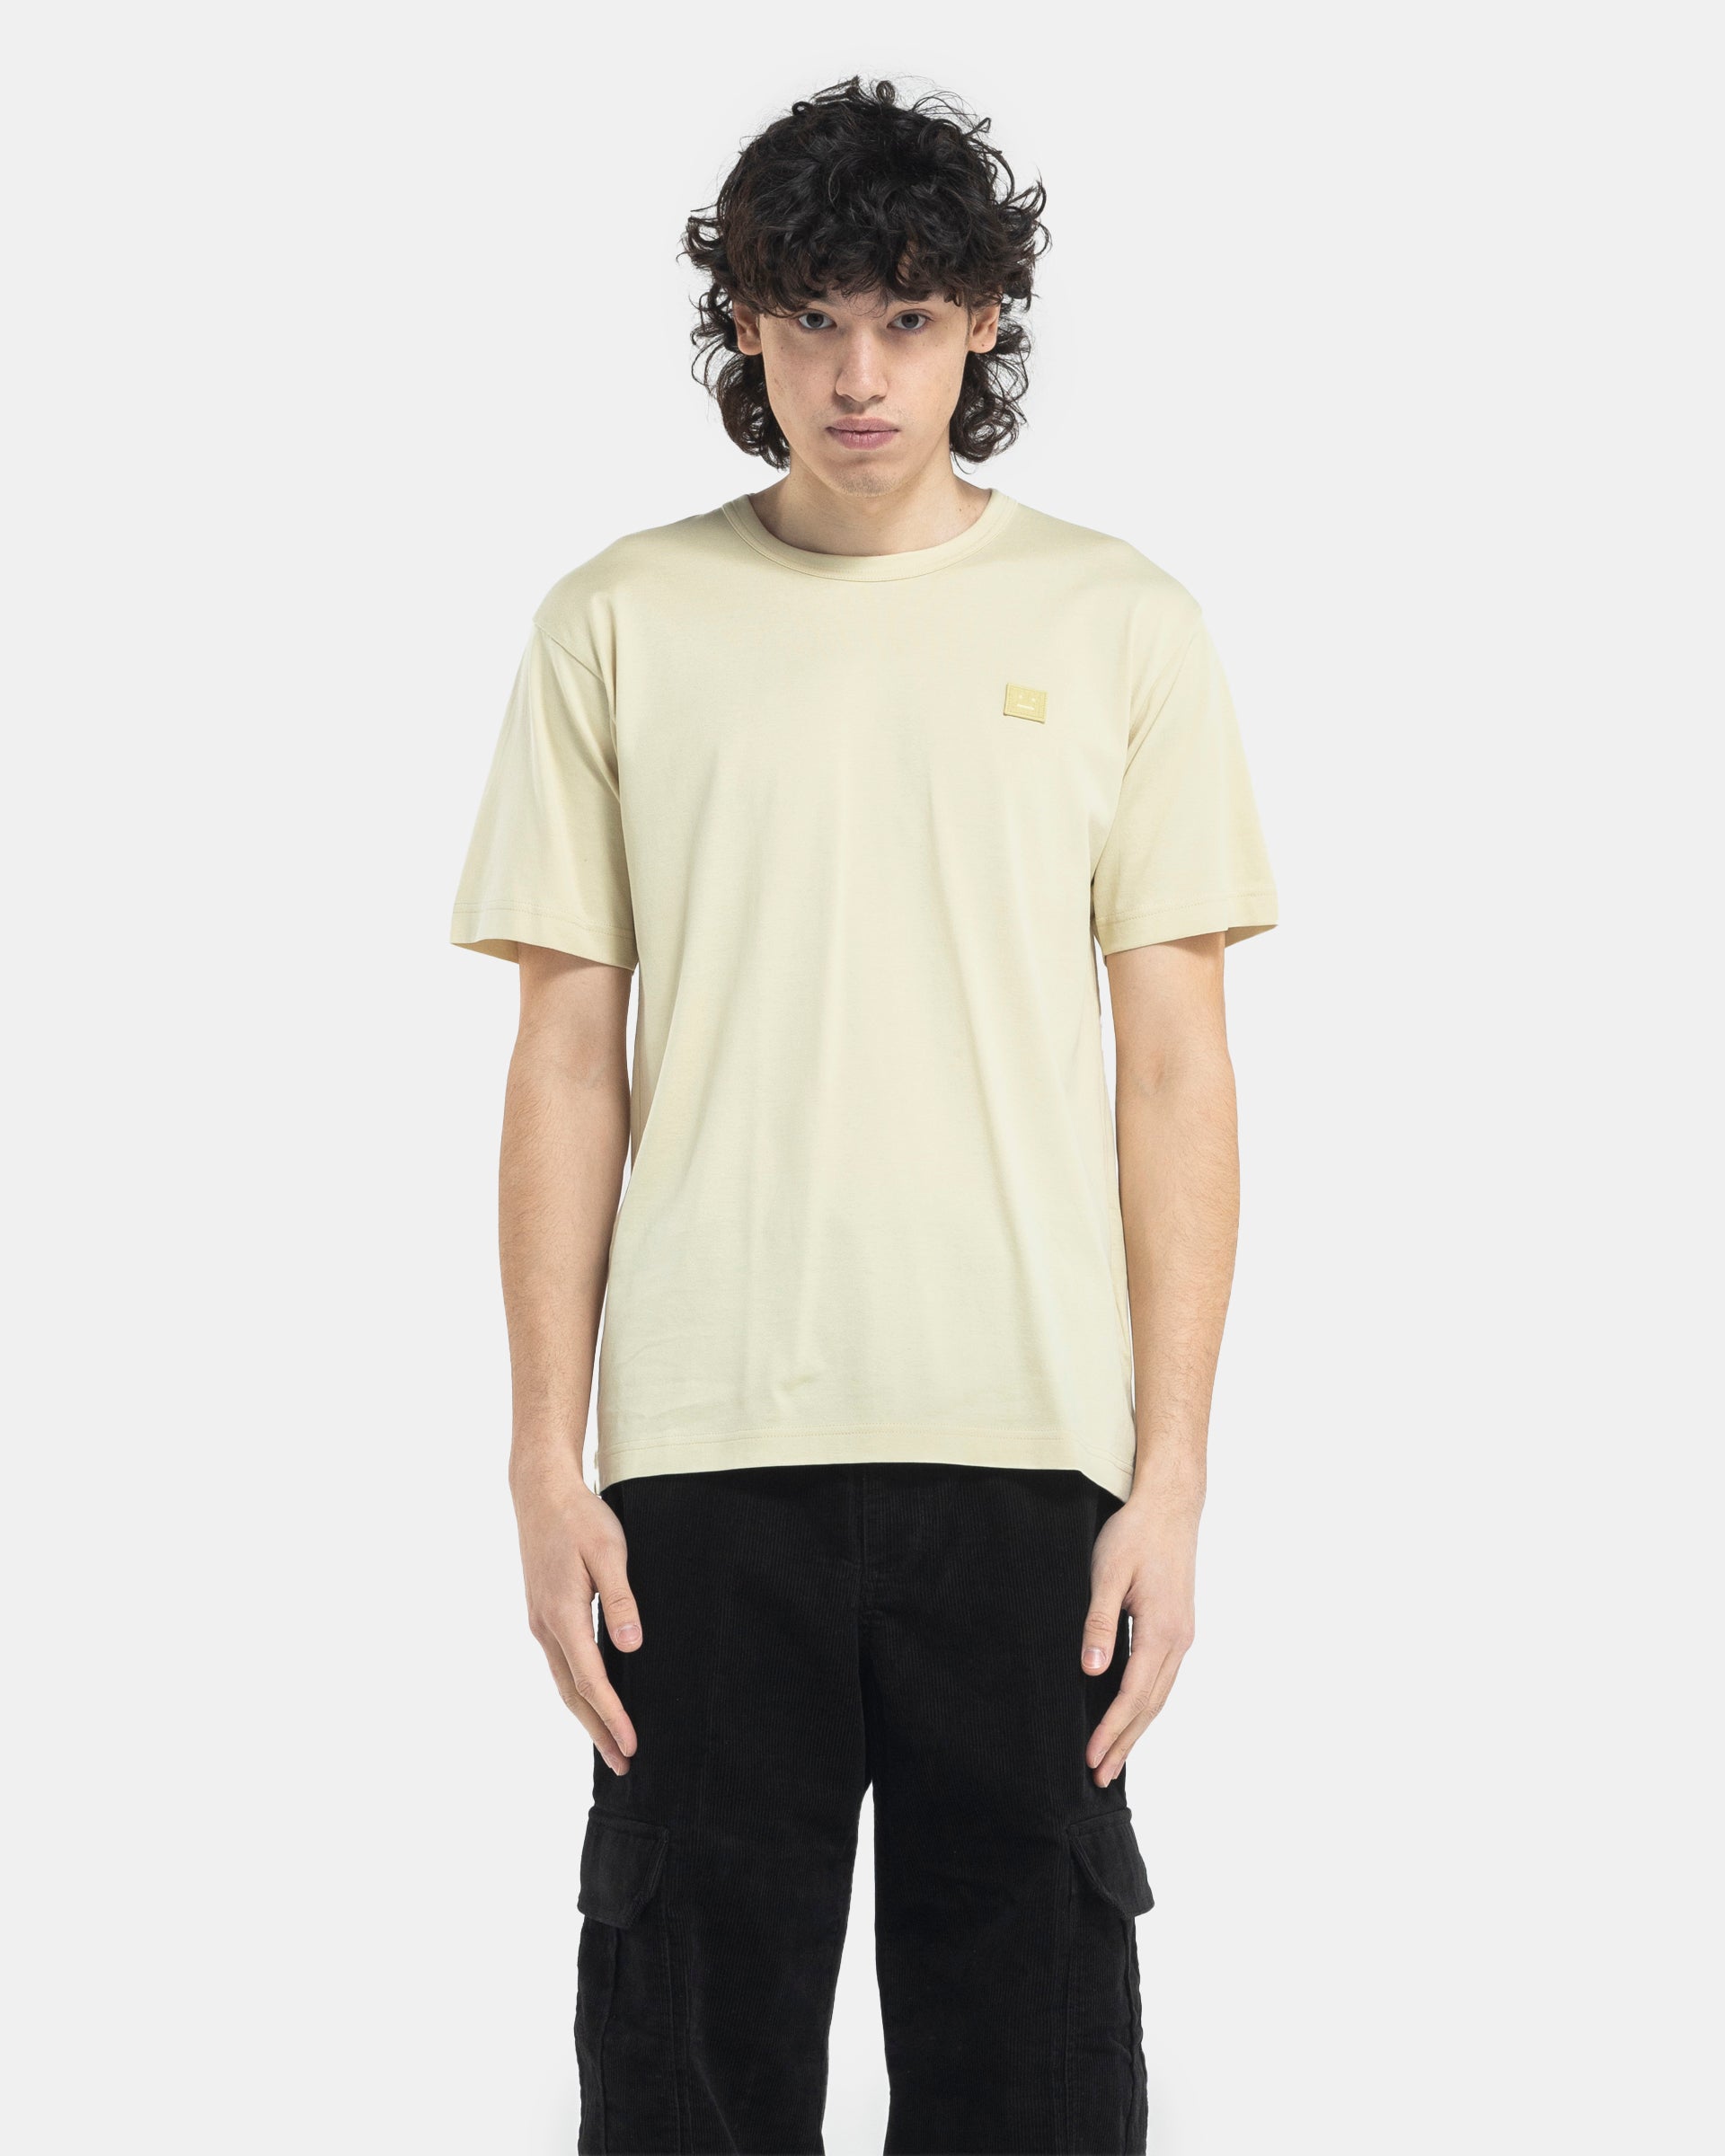 Crew Neck T-Shirt in Sand & Green